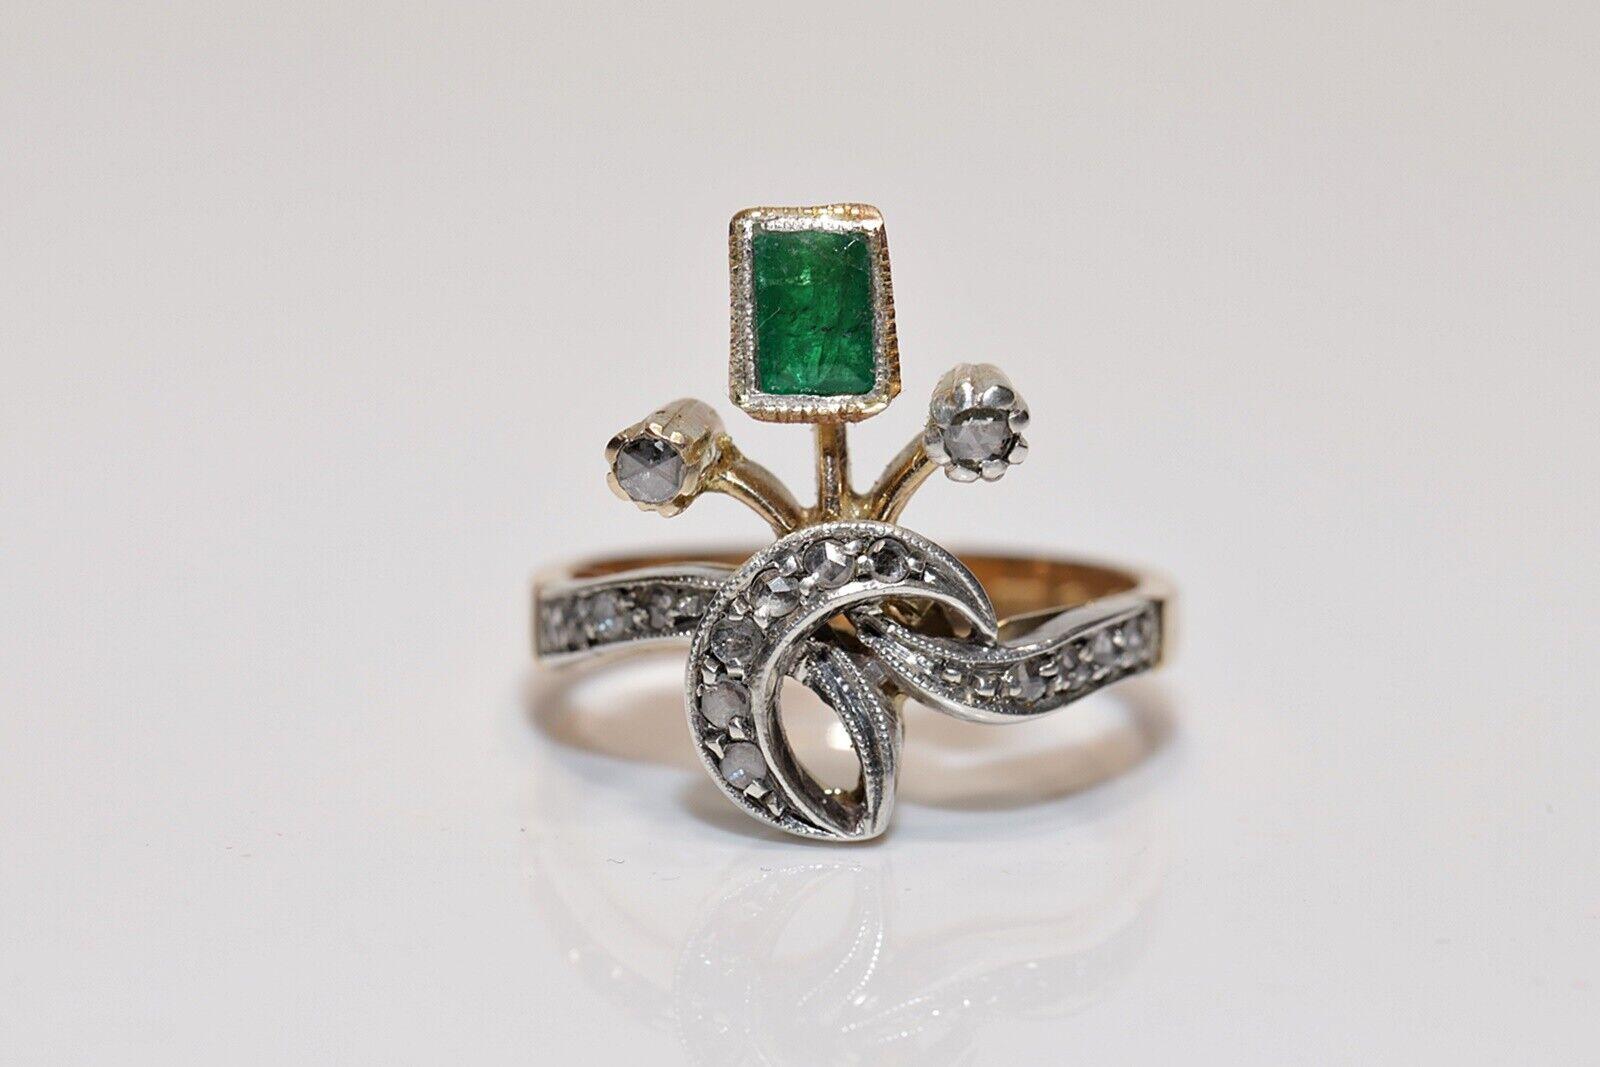 In very good condition.
Total weight is 5.6 grams.
Dimention is diamond totally 0.15 carat.
Dimention is emerald about 0.50 carat.
Ring size is US 7.4 (We offer free resizing )
We can make any size.
Box is not included.
Please contact for any